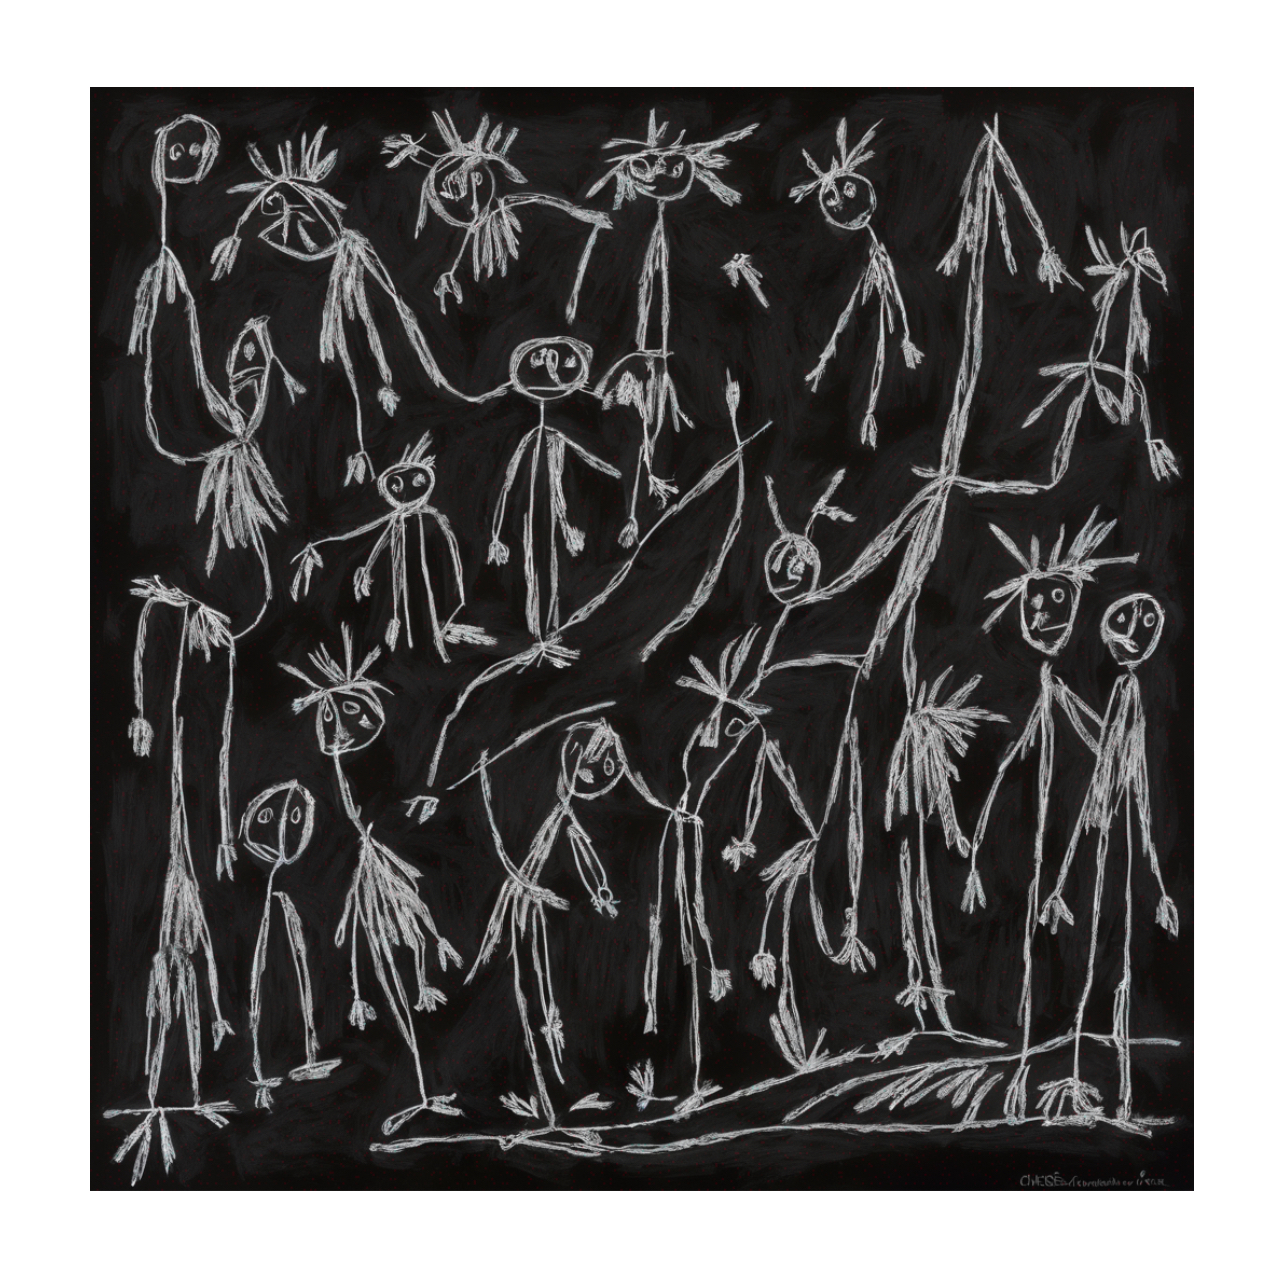 Childlike drawings of stick figures on a black background, resembling a chalkboard sketch